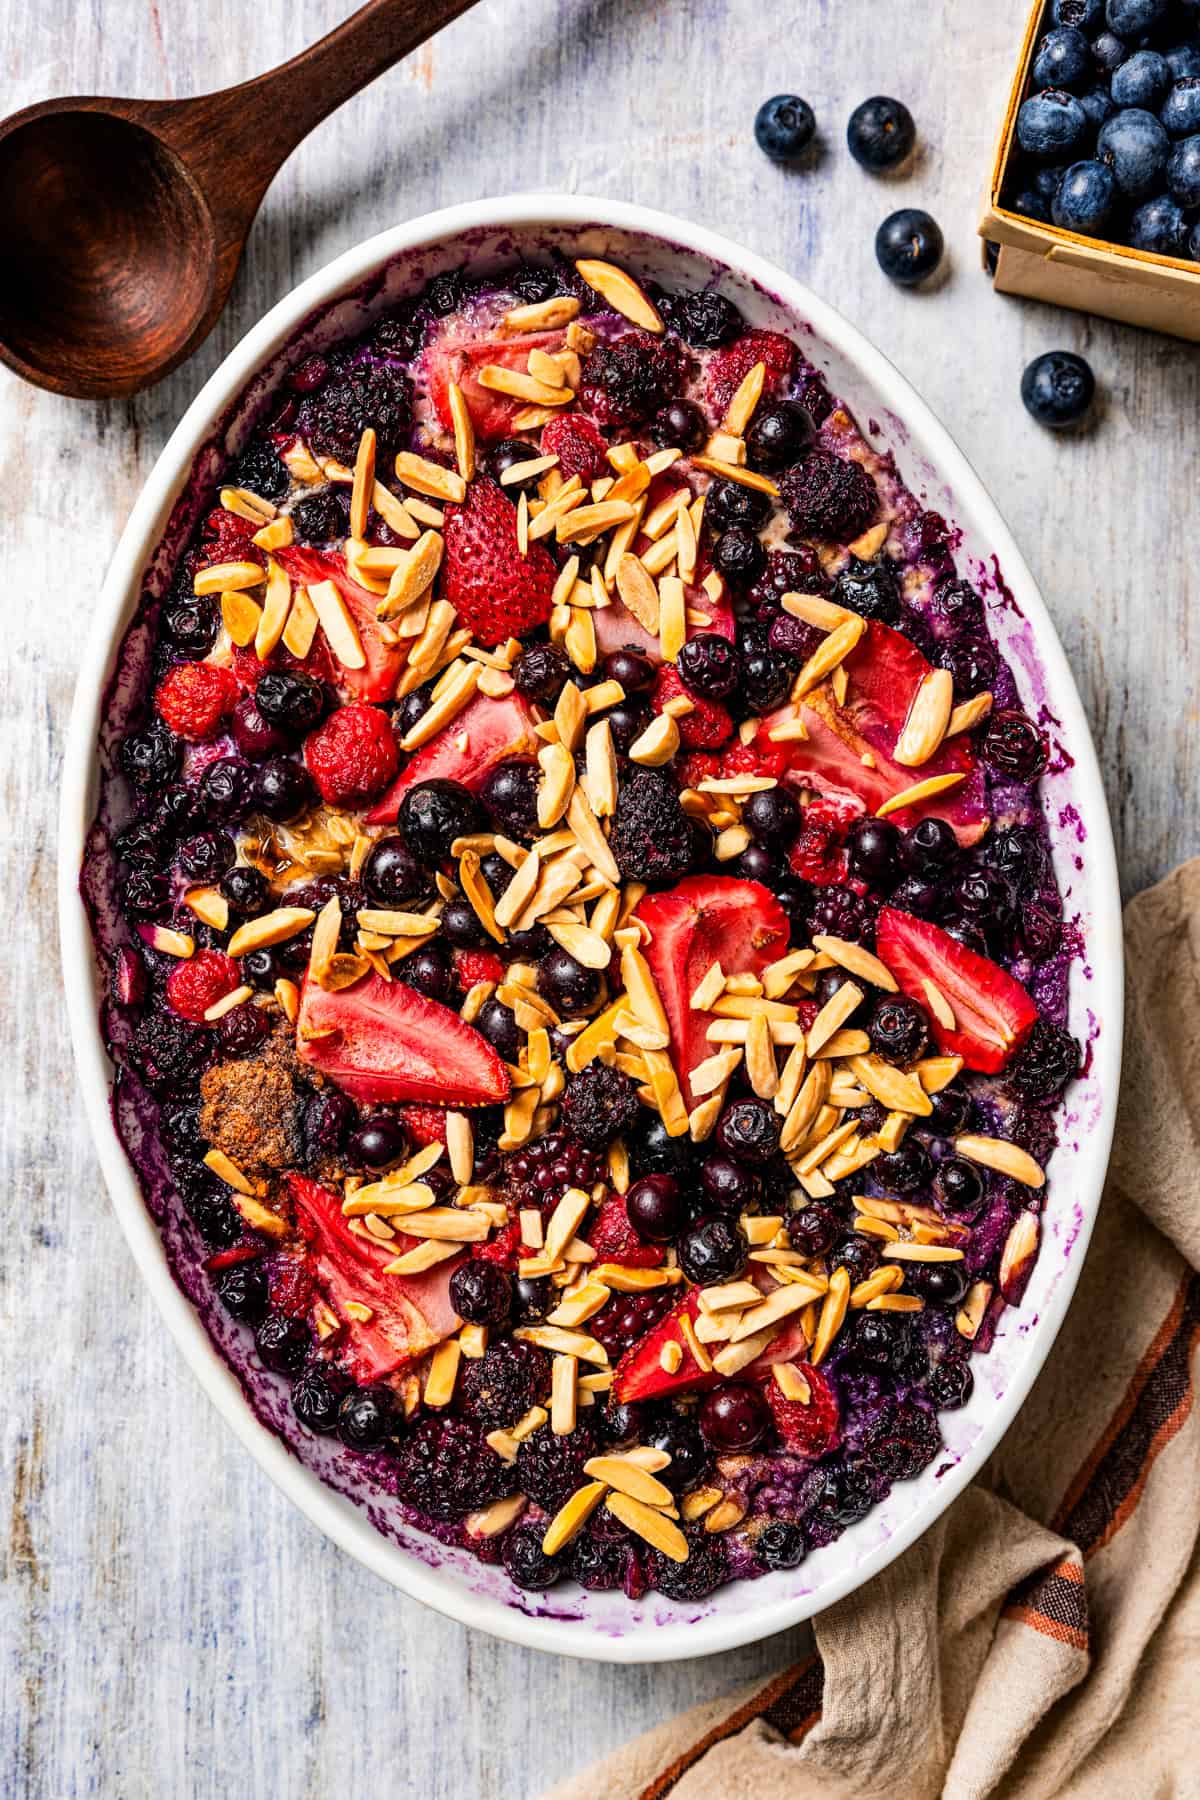 Assembled berry oatmeal in an oval casserole dish.